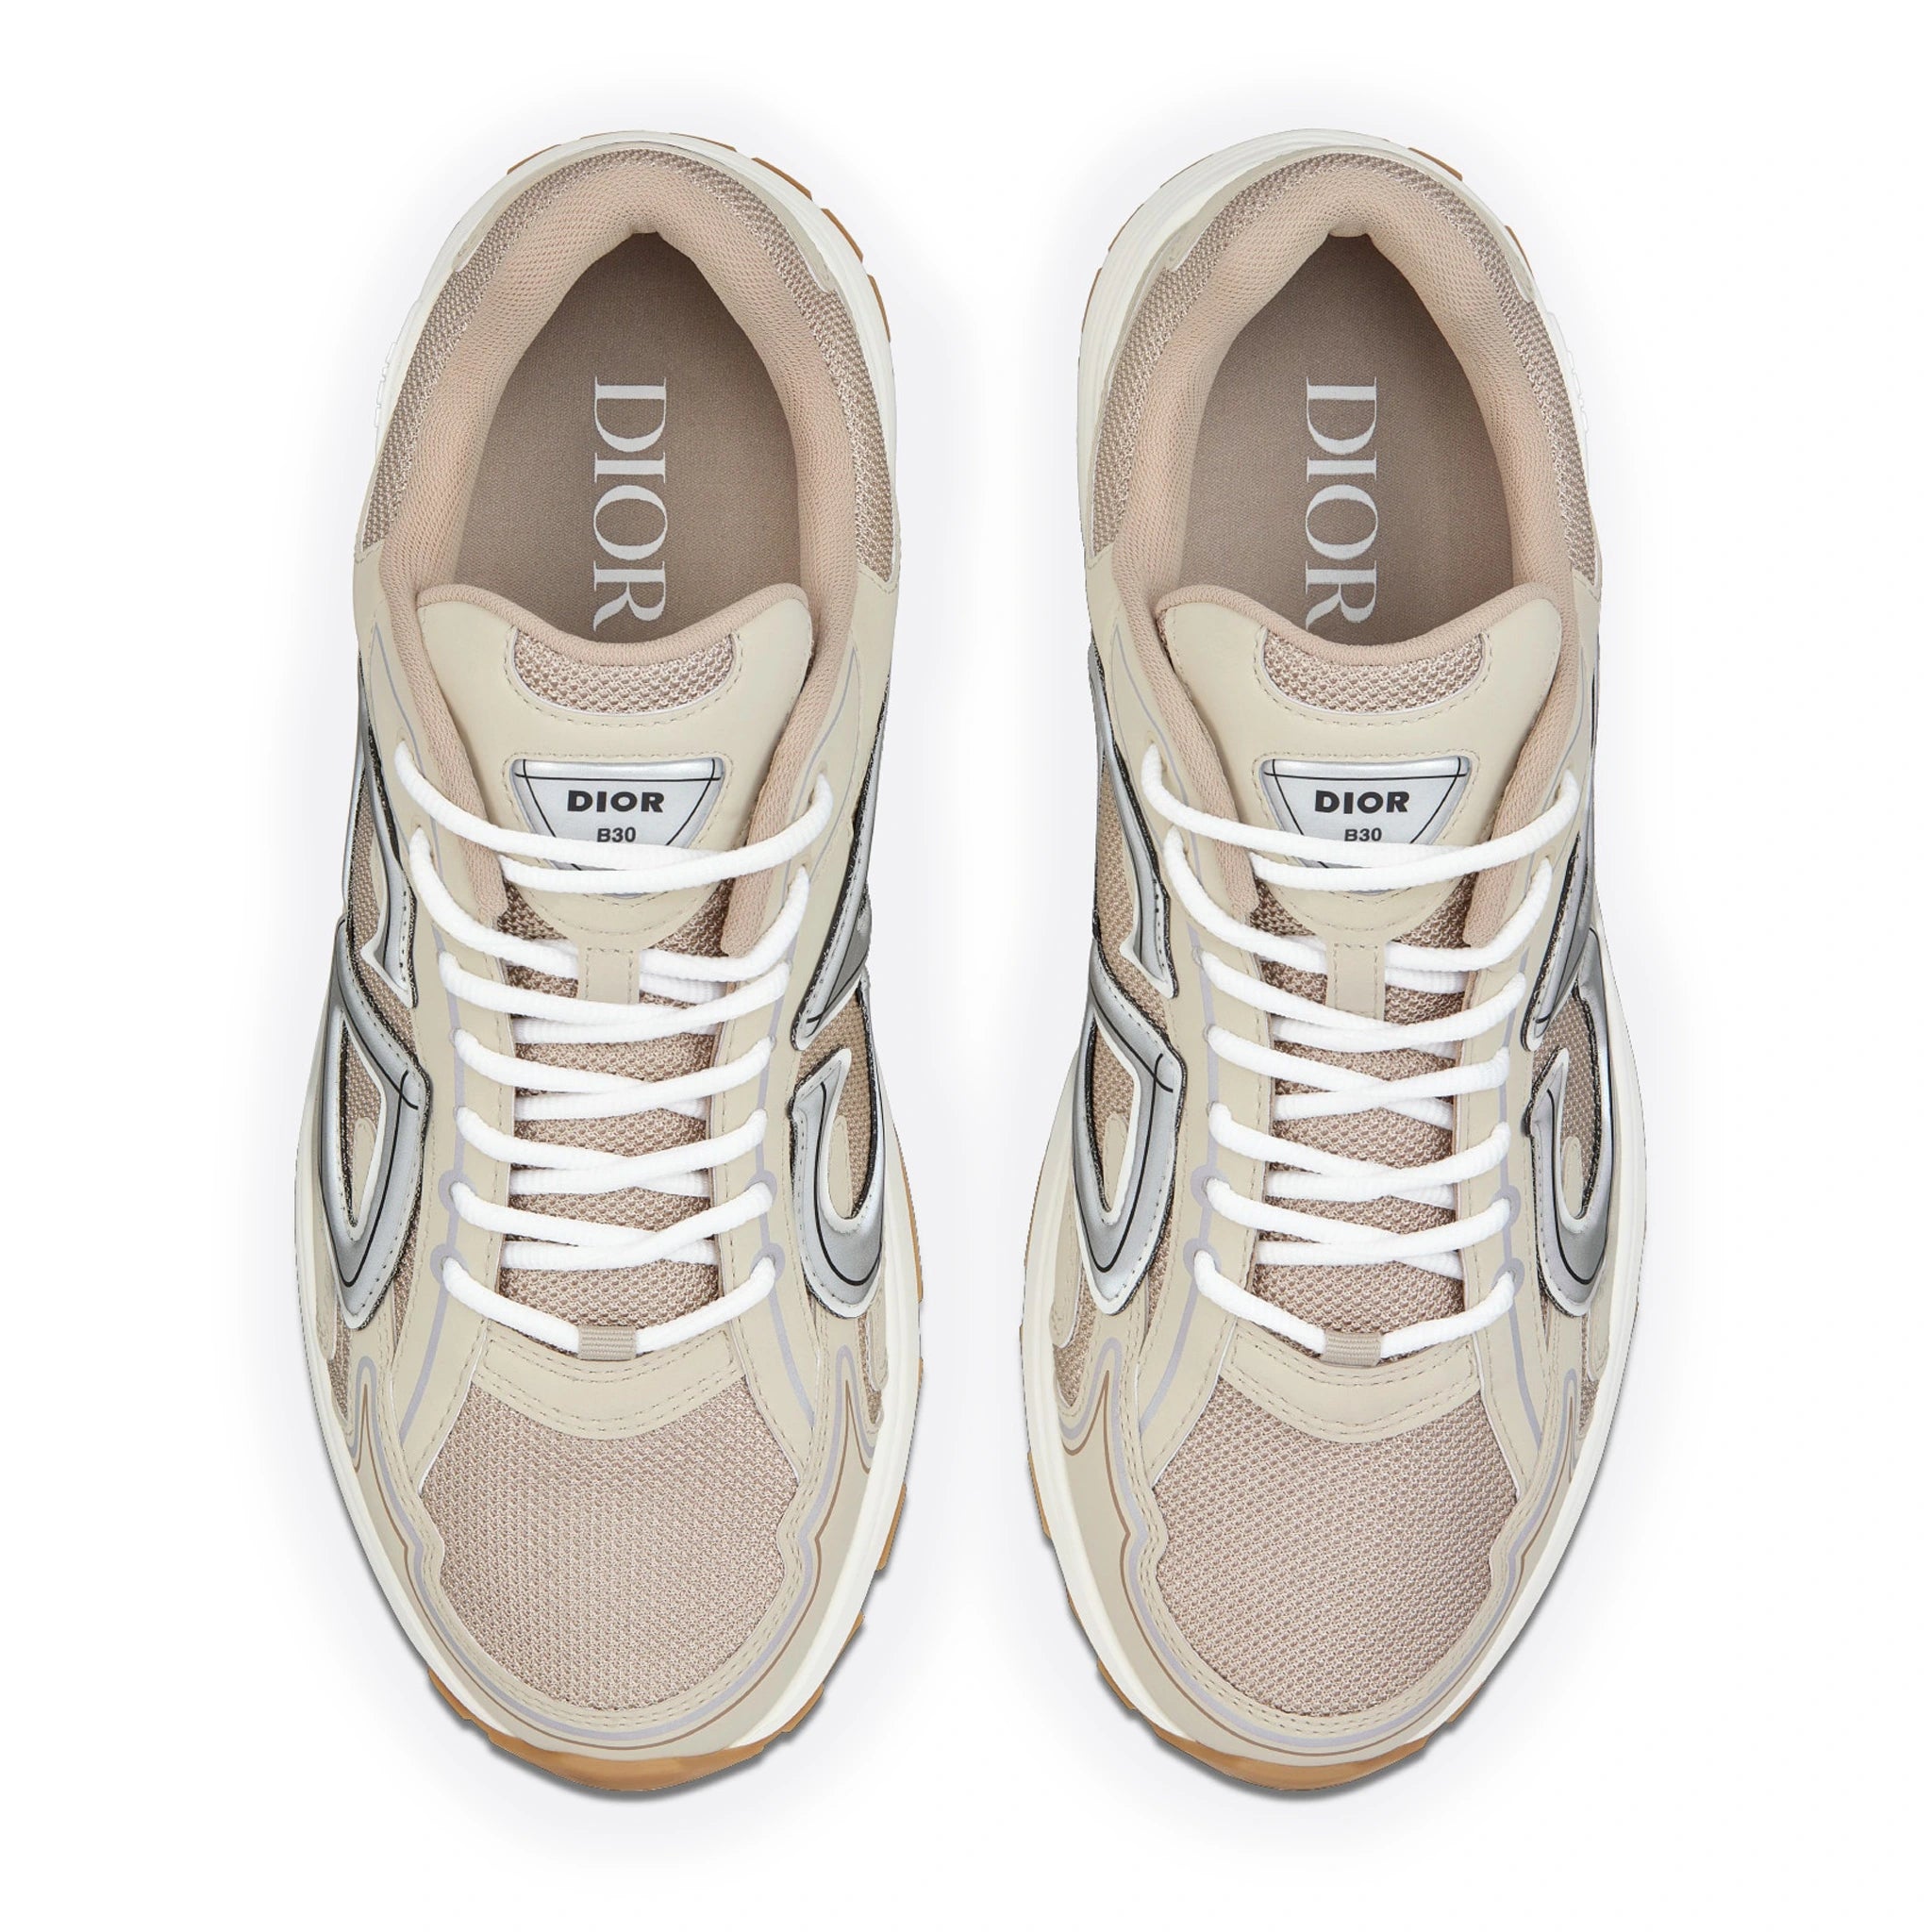 Top view of Dior B30 Mesh Cream Trainer 3SN279ZMA_H161